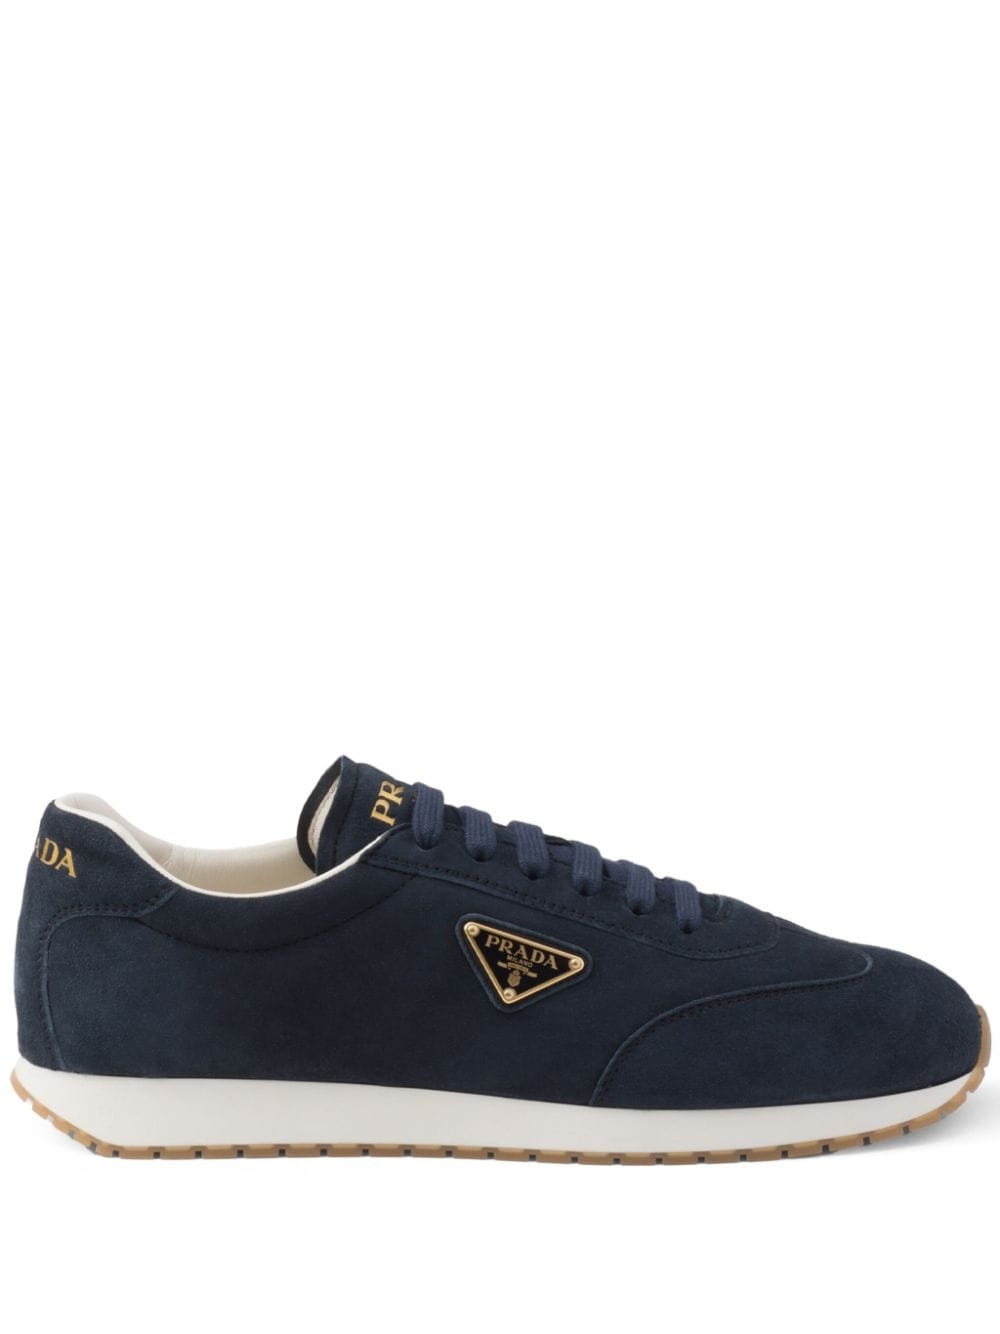 triangle-logo suede sneakers - 1